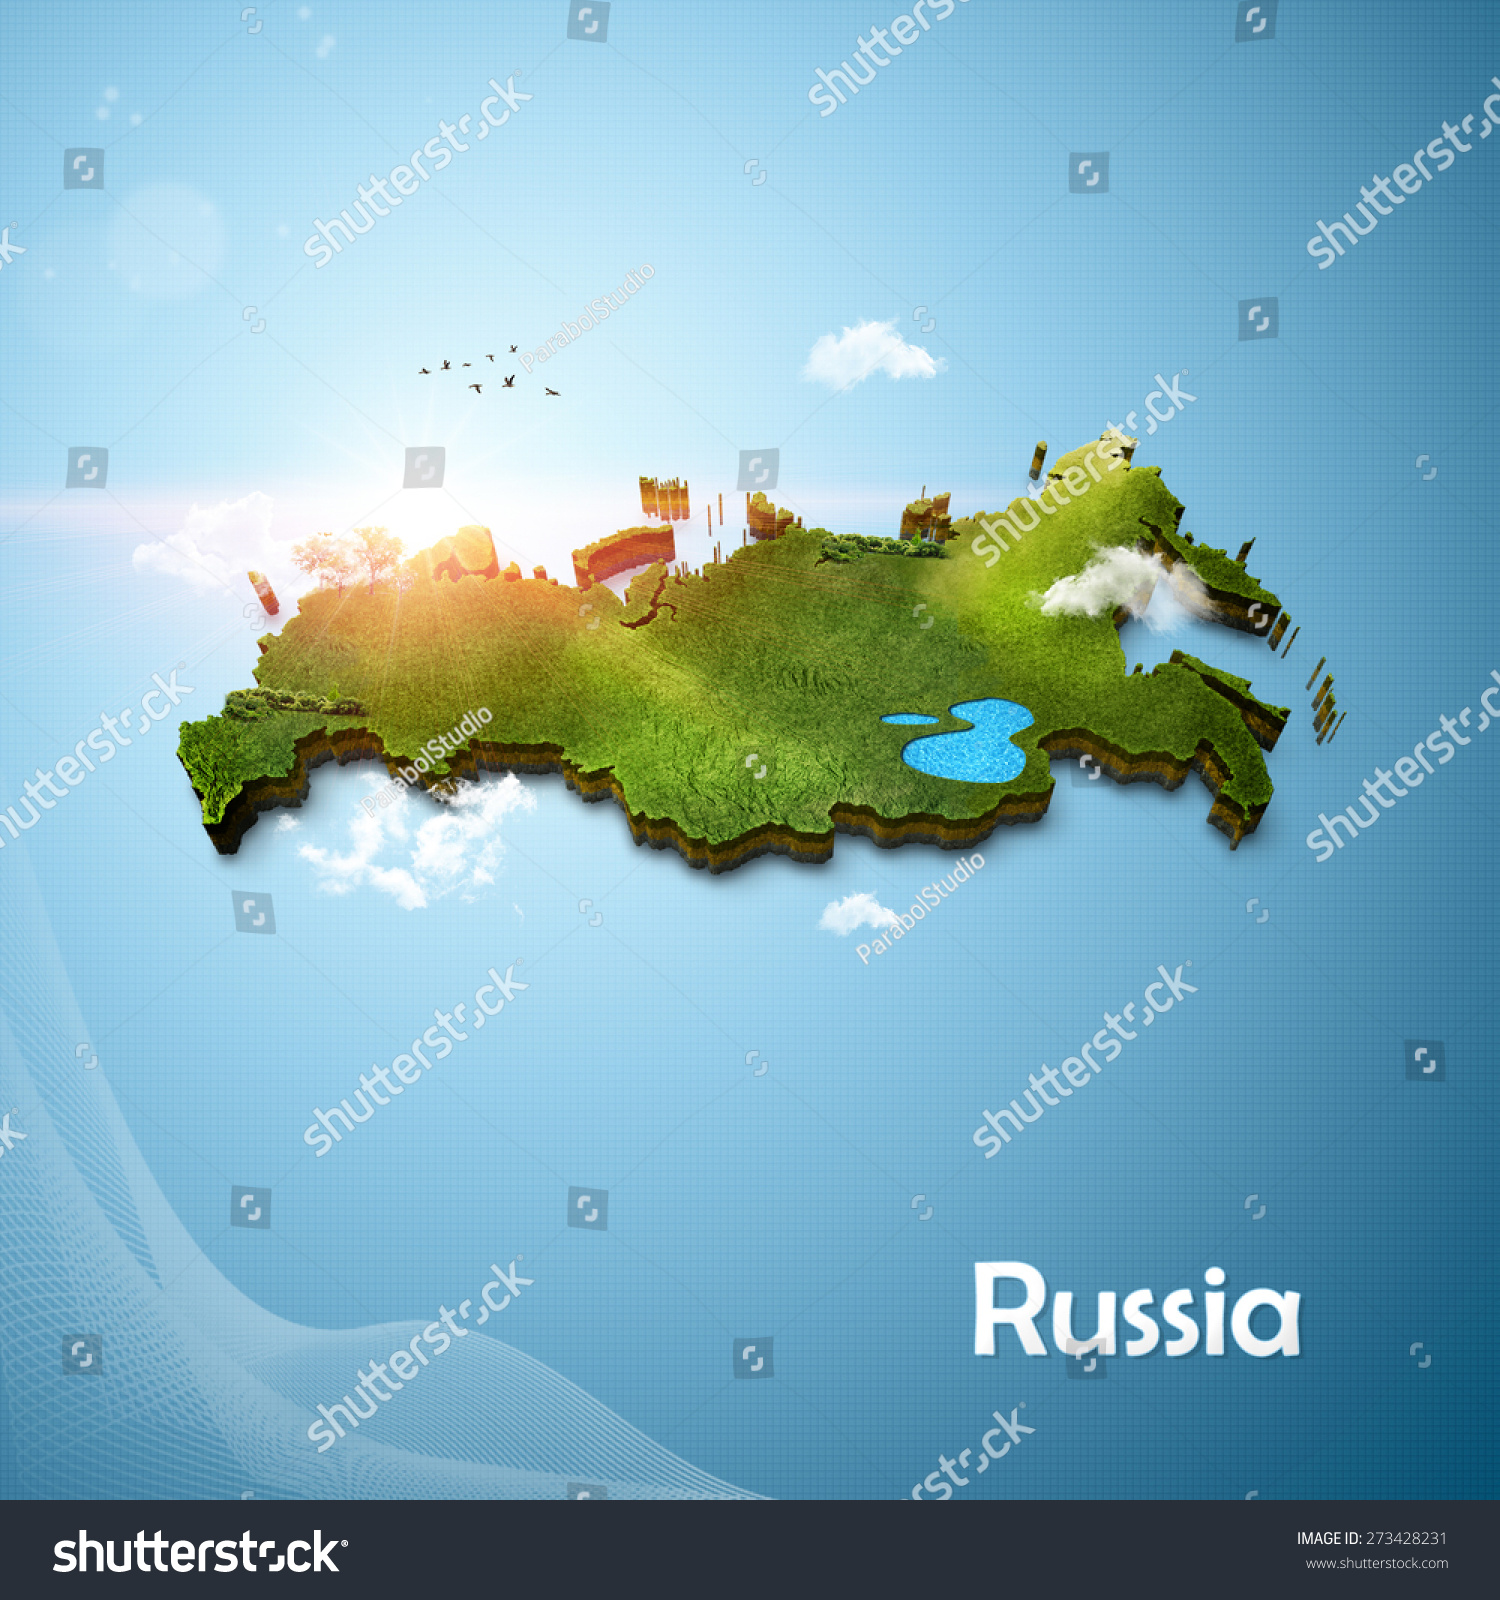 Realistic 3d Map Russia Stock Illustration 273428231 